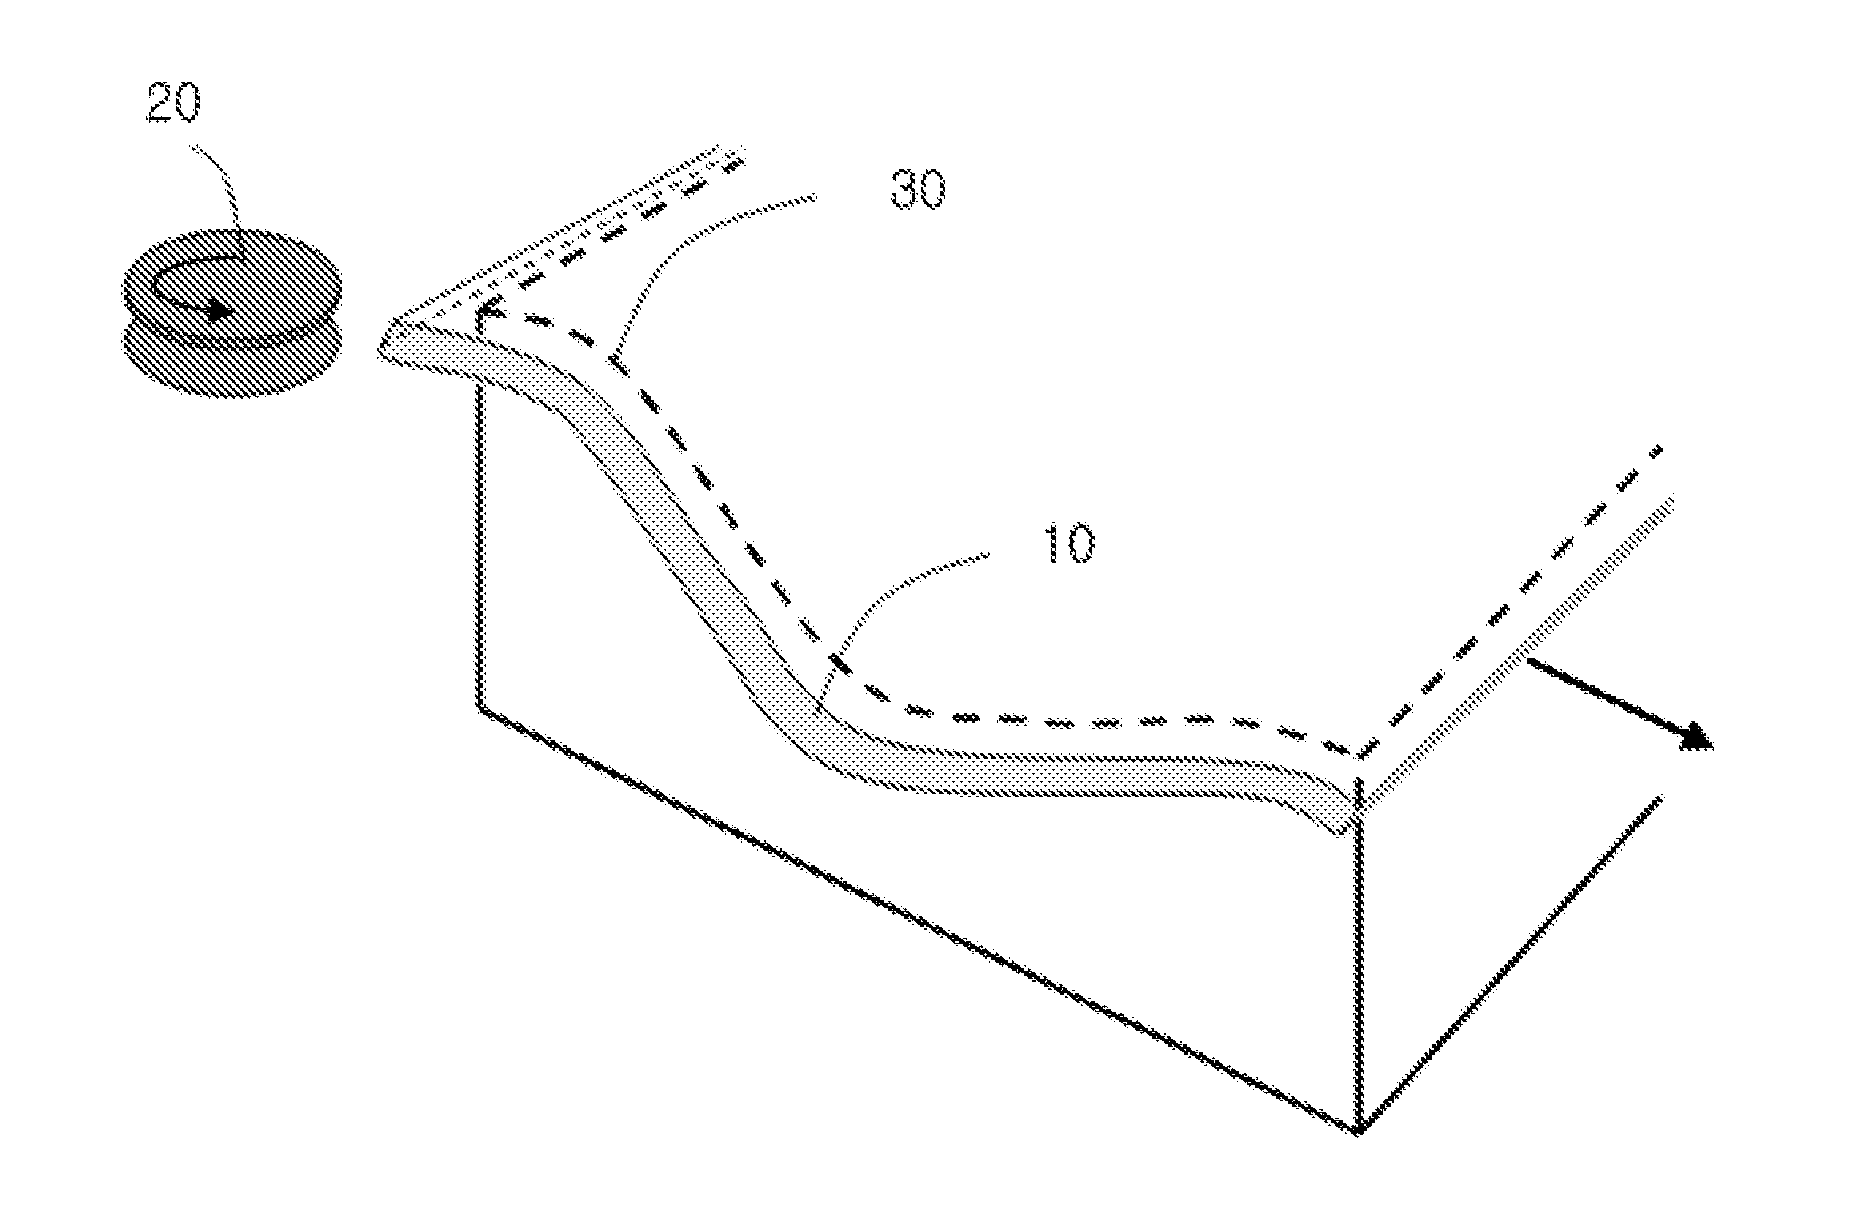 Method of measuring flatness of chamfering table